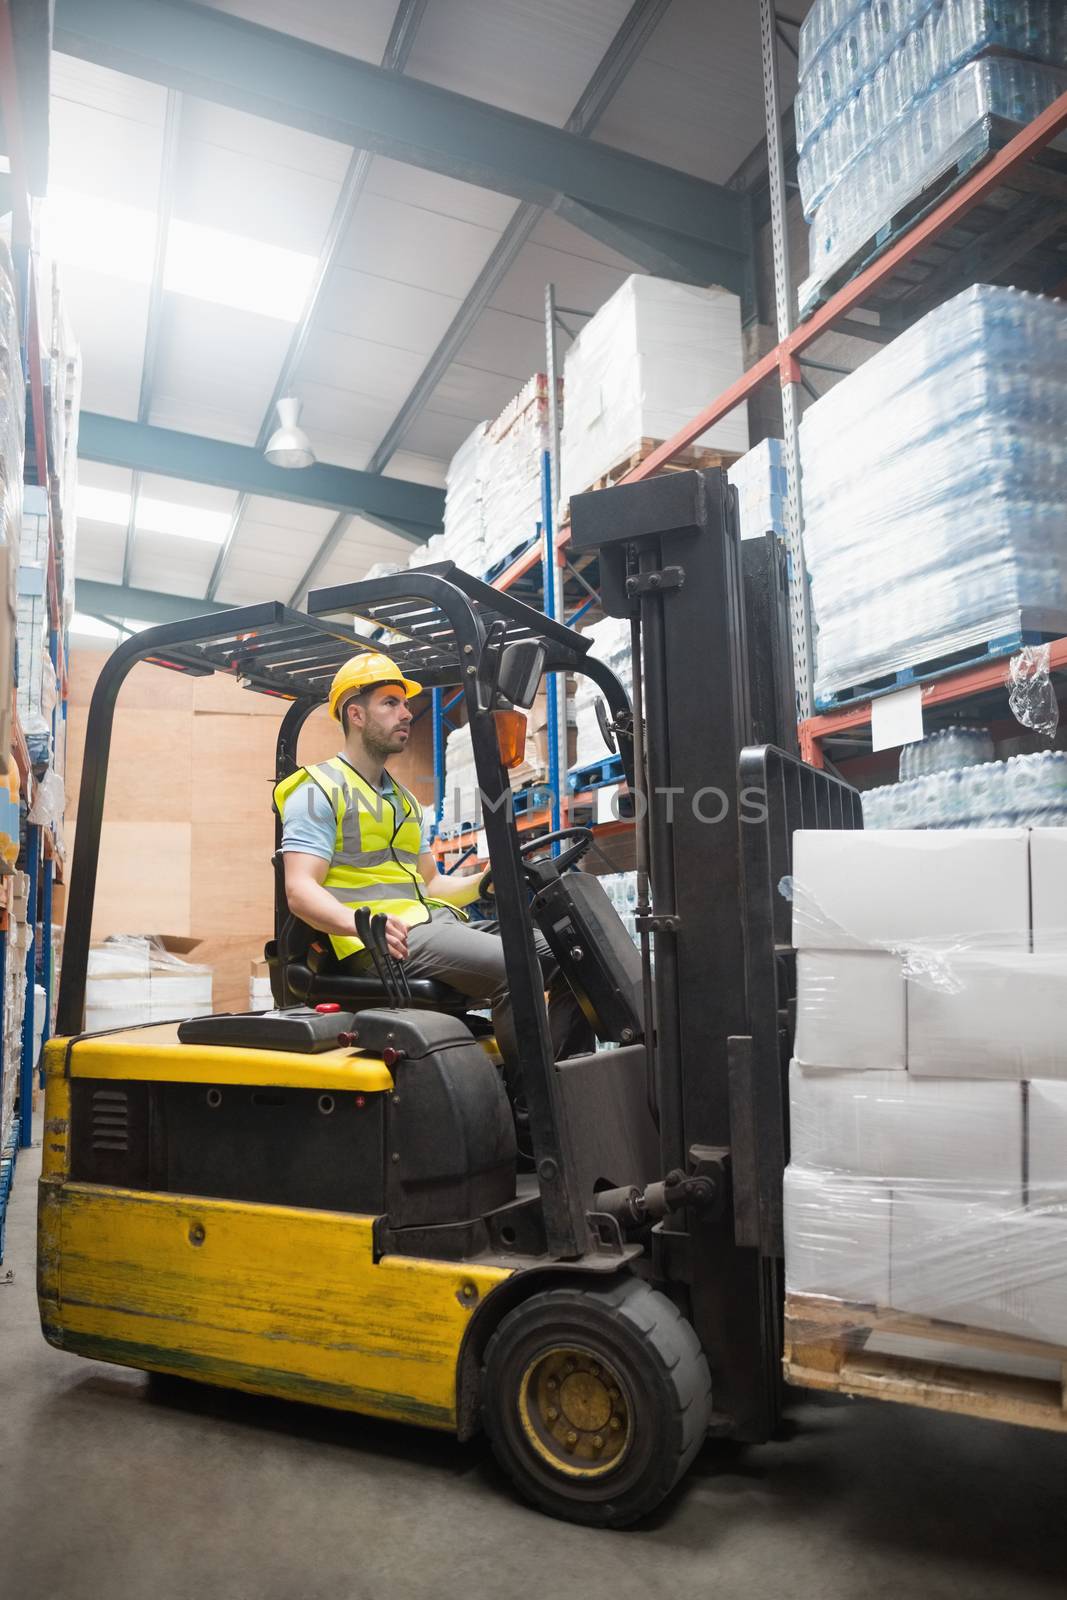 Focused driver operating forklift machine in warehouse